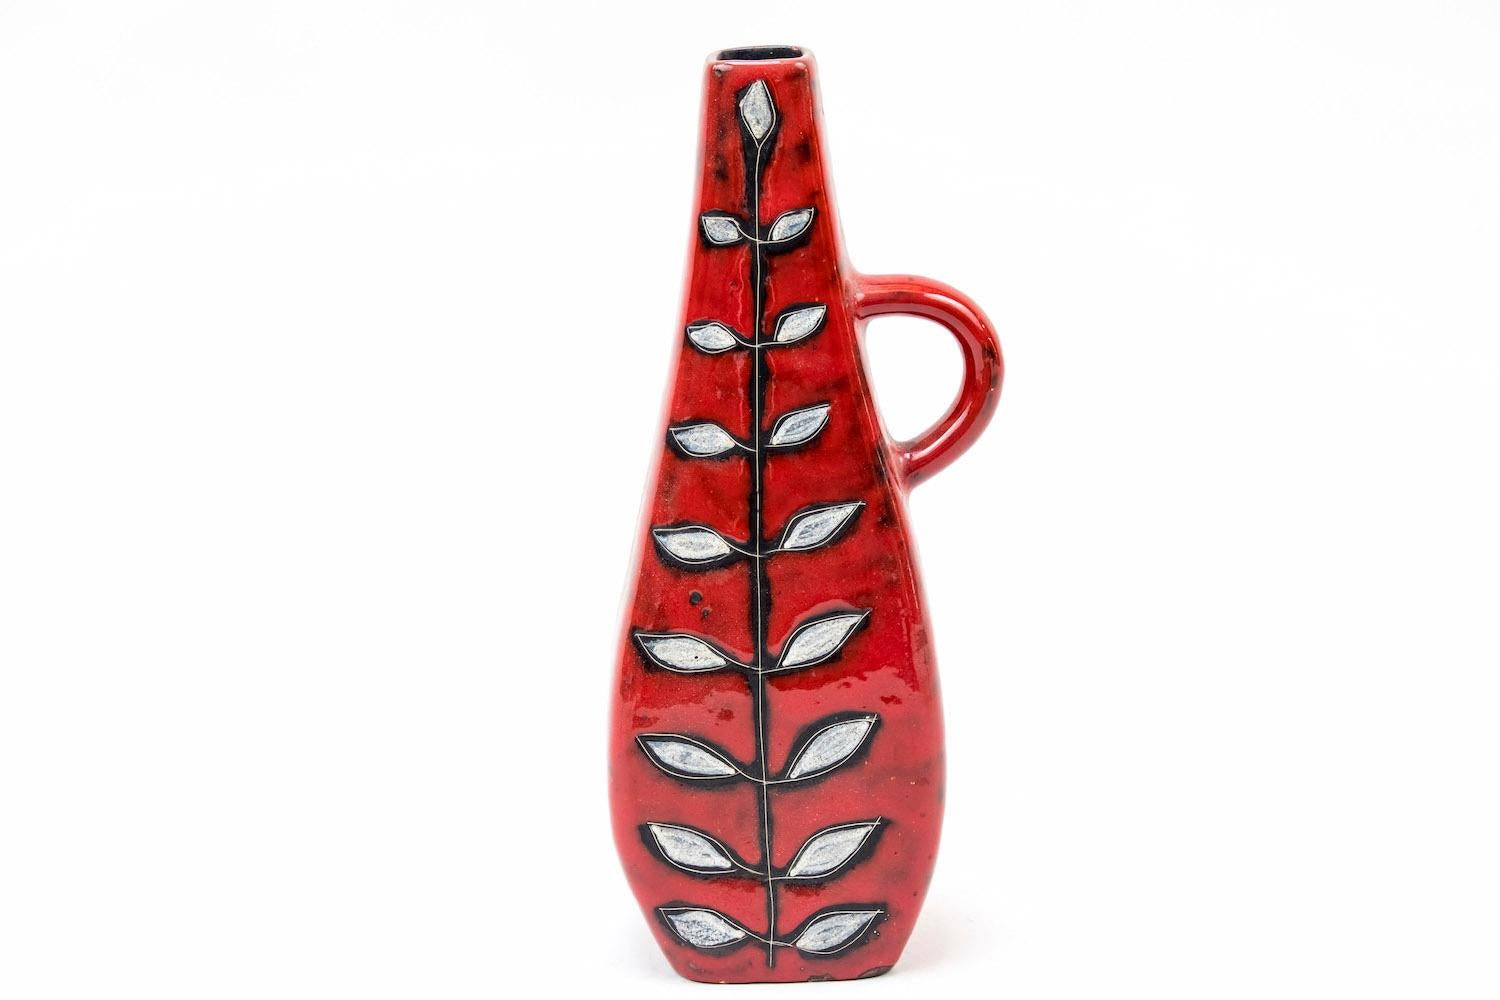 Bud vase in red earthenware with one handle, in flat bottle shape.
Decor of a stylized plant with white leaves.

“Italy” engraved on the bottom.

Italian work realized in the 1950s.